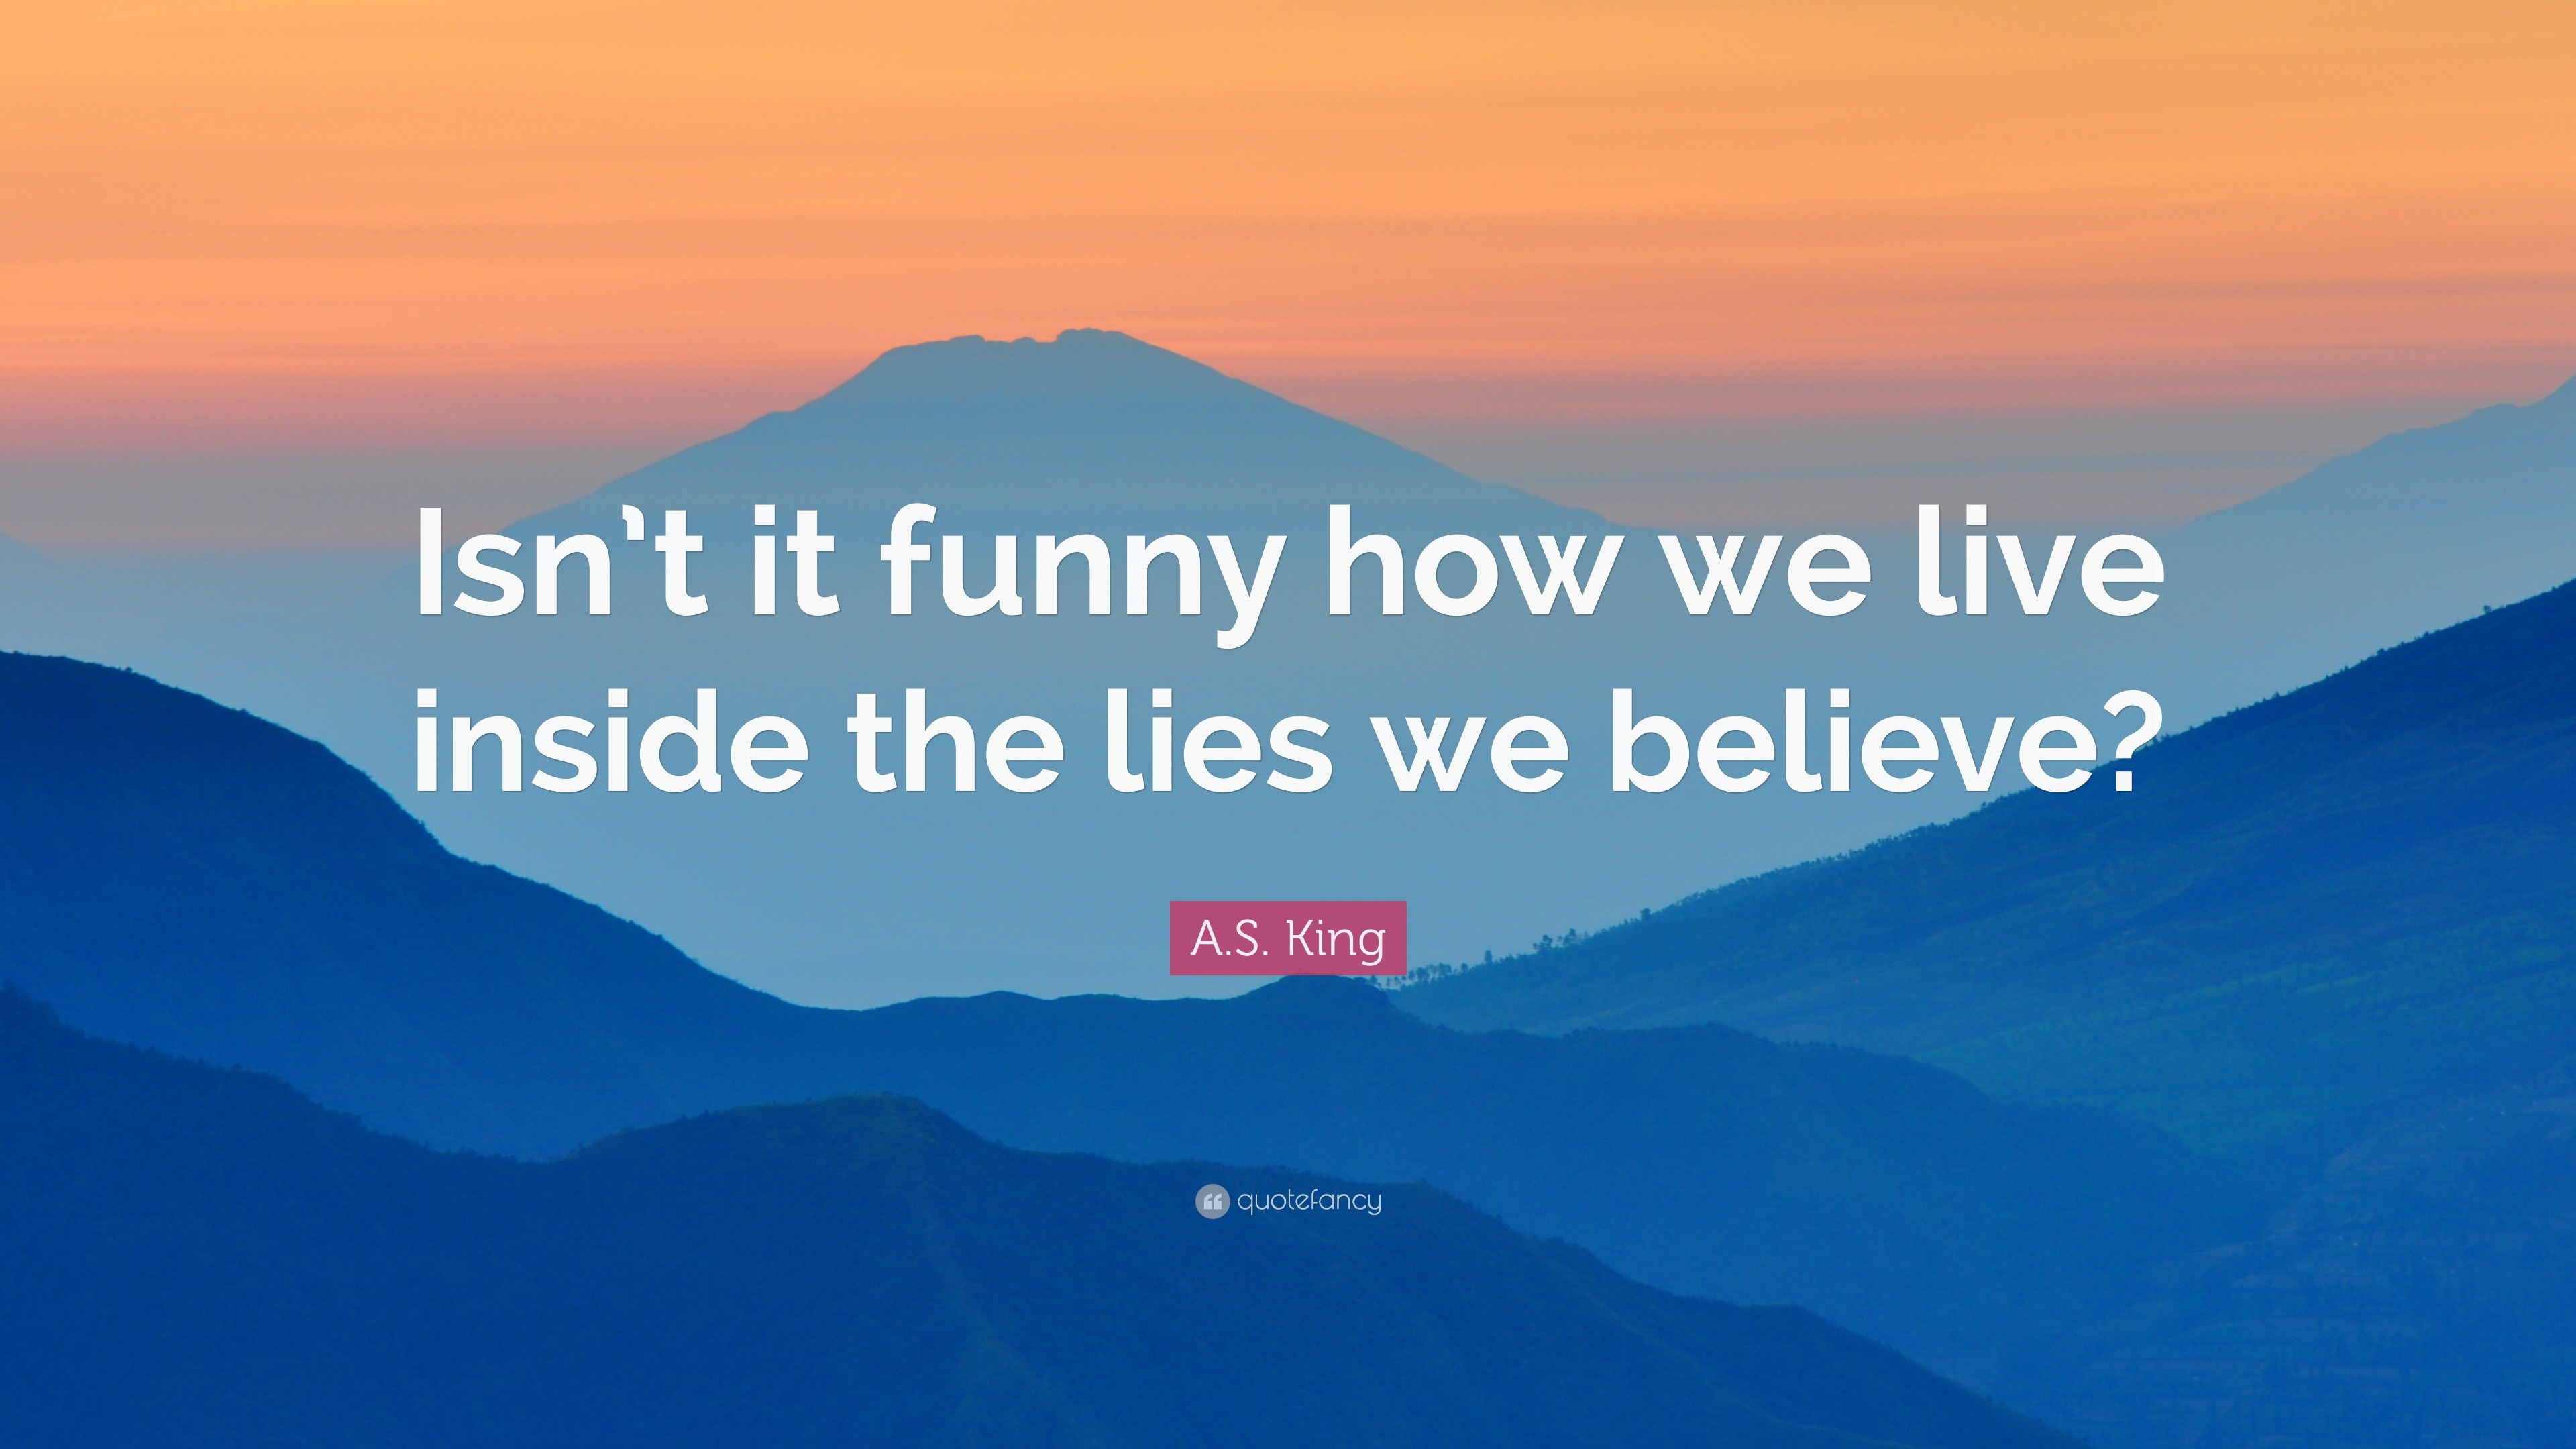 . King Quote: “Isn't it funny how we live inside the lies we believe?”